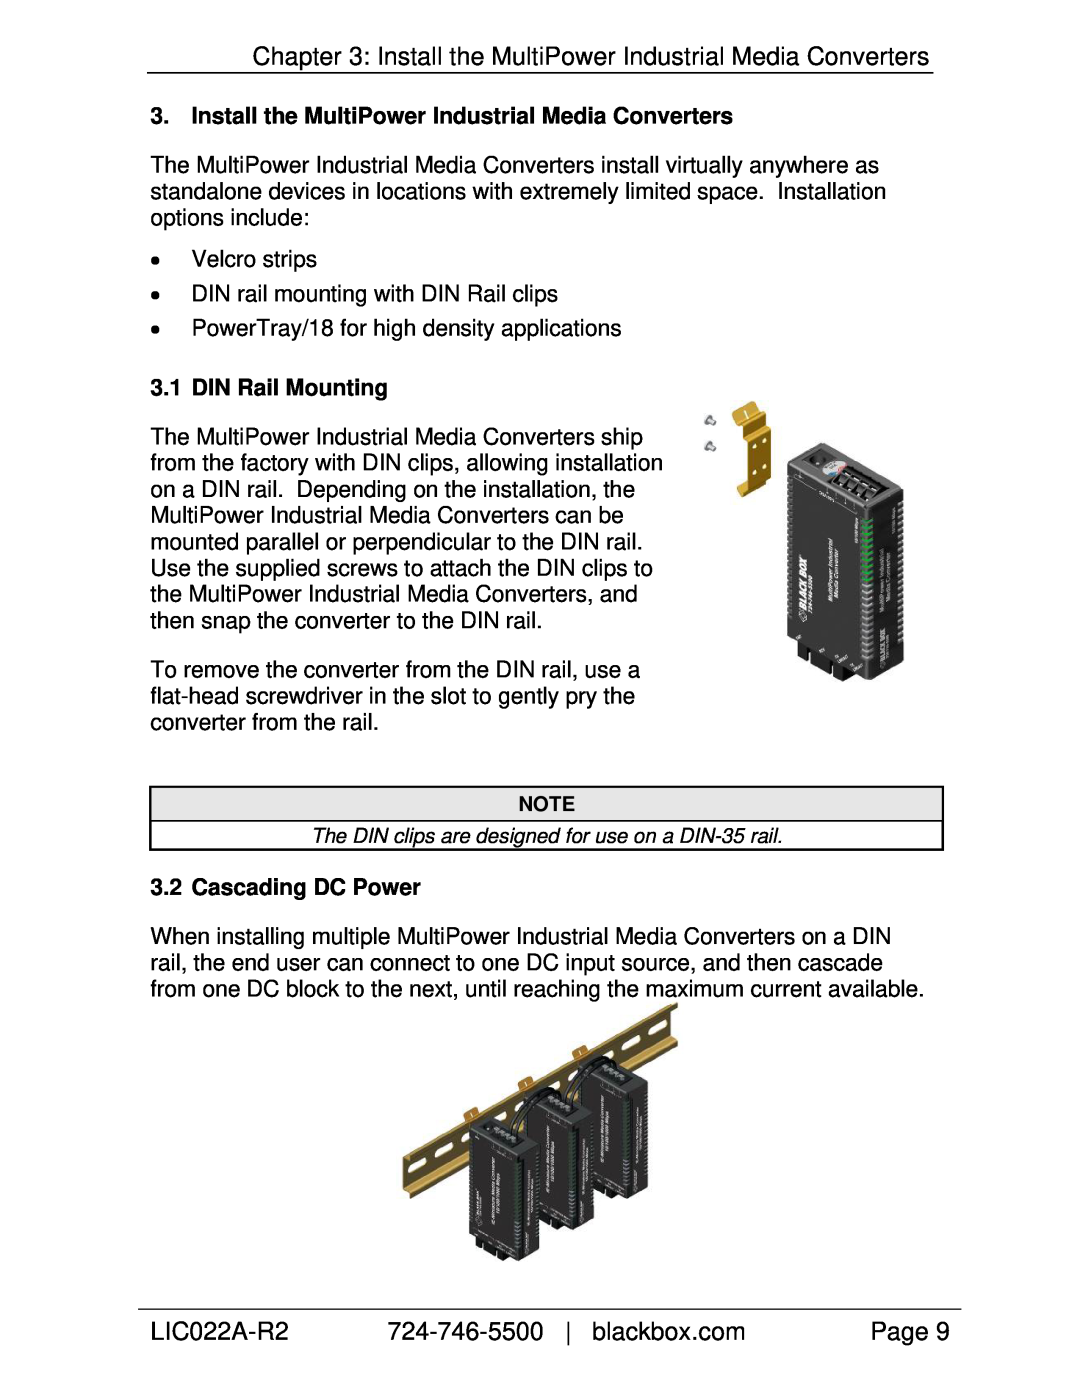 Black Box LIC055A-R2 Install the MultiPower Industrial Media Converters, DIN Rail Mounting, Cascading DC Power, LIC022A-R2 